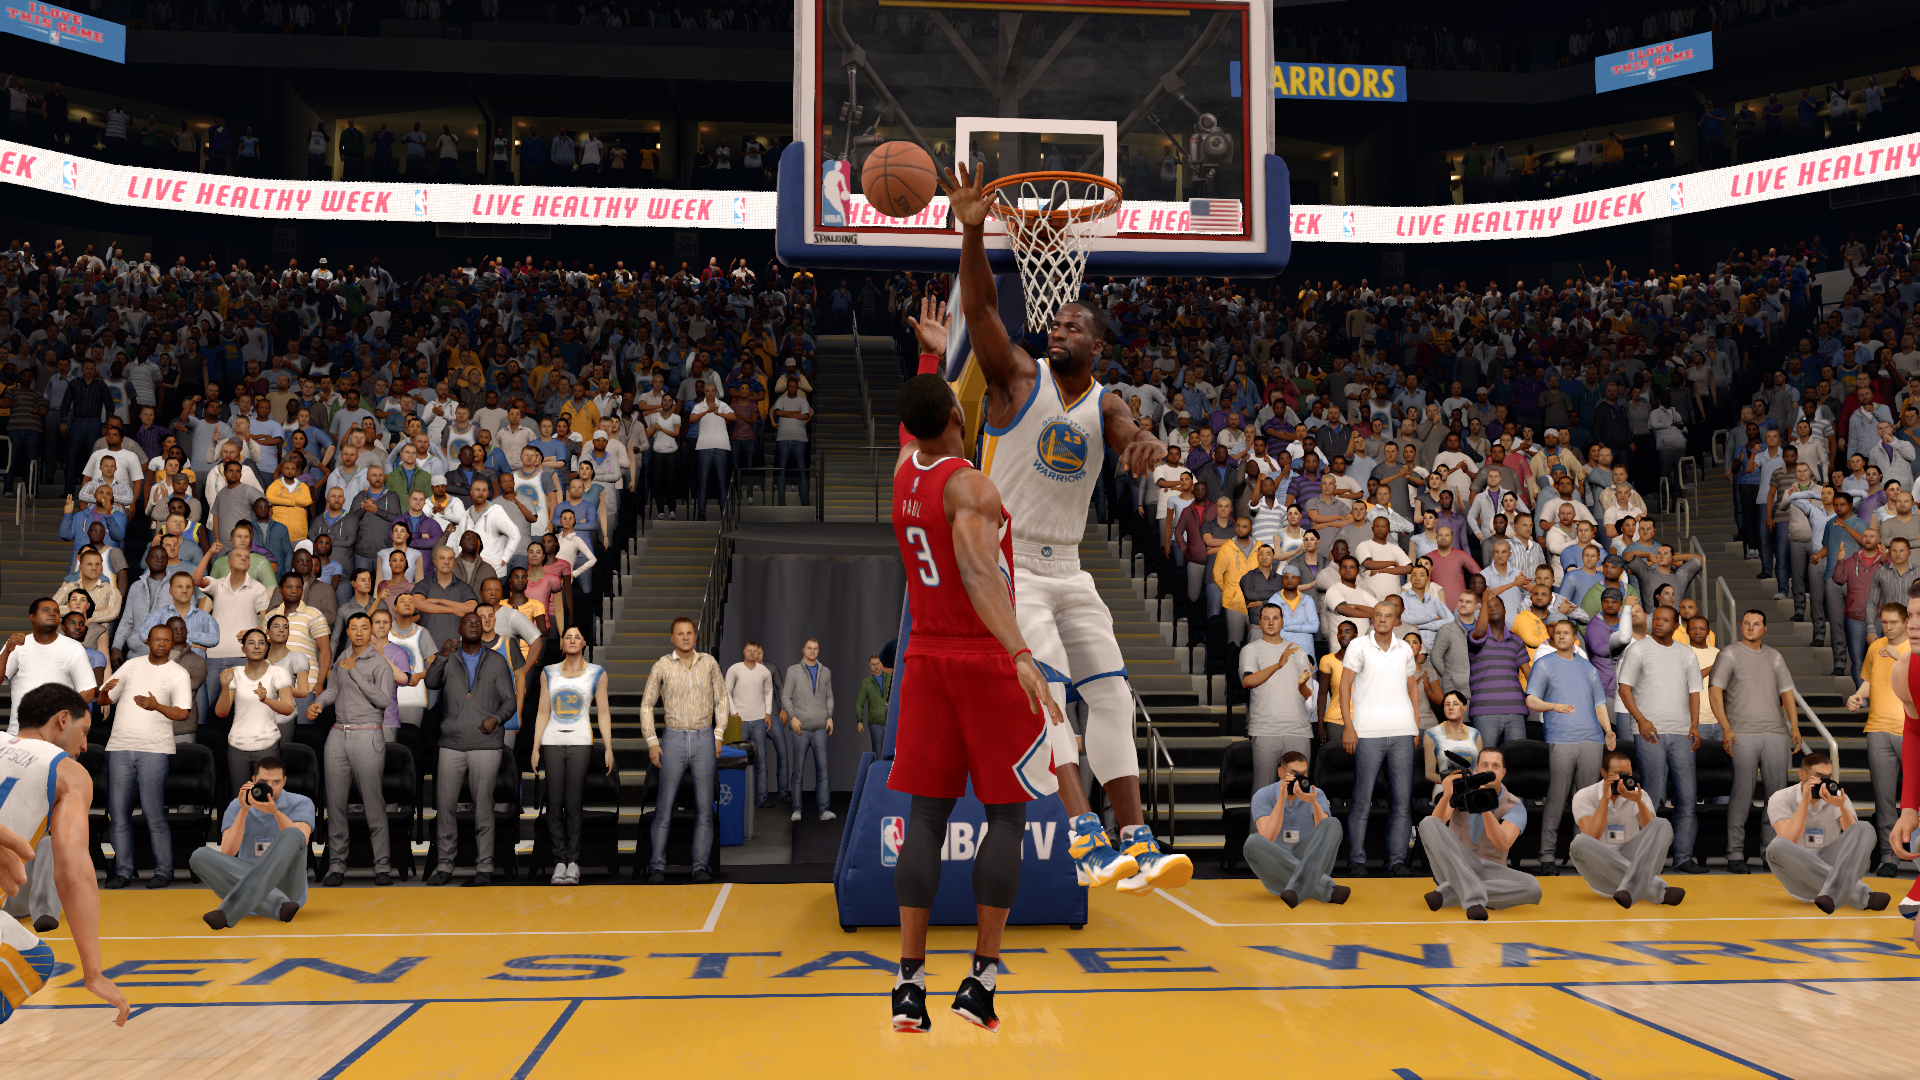 The new NBA Live video game is less fun than getting beat up in gym class BusinessInsider India